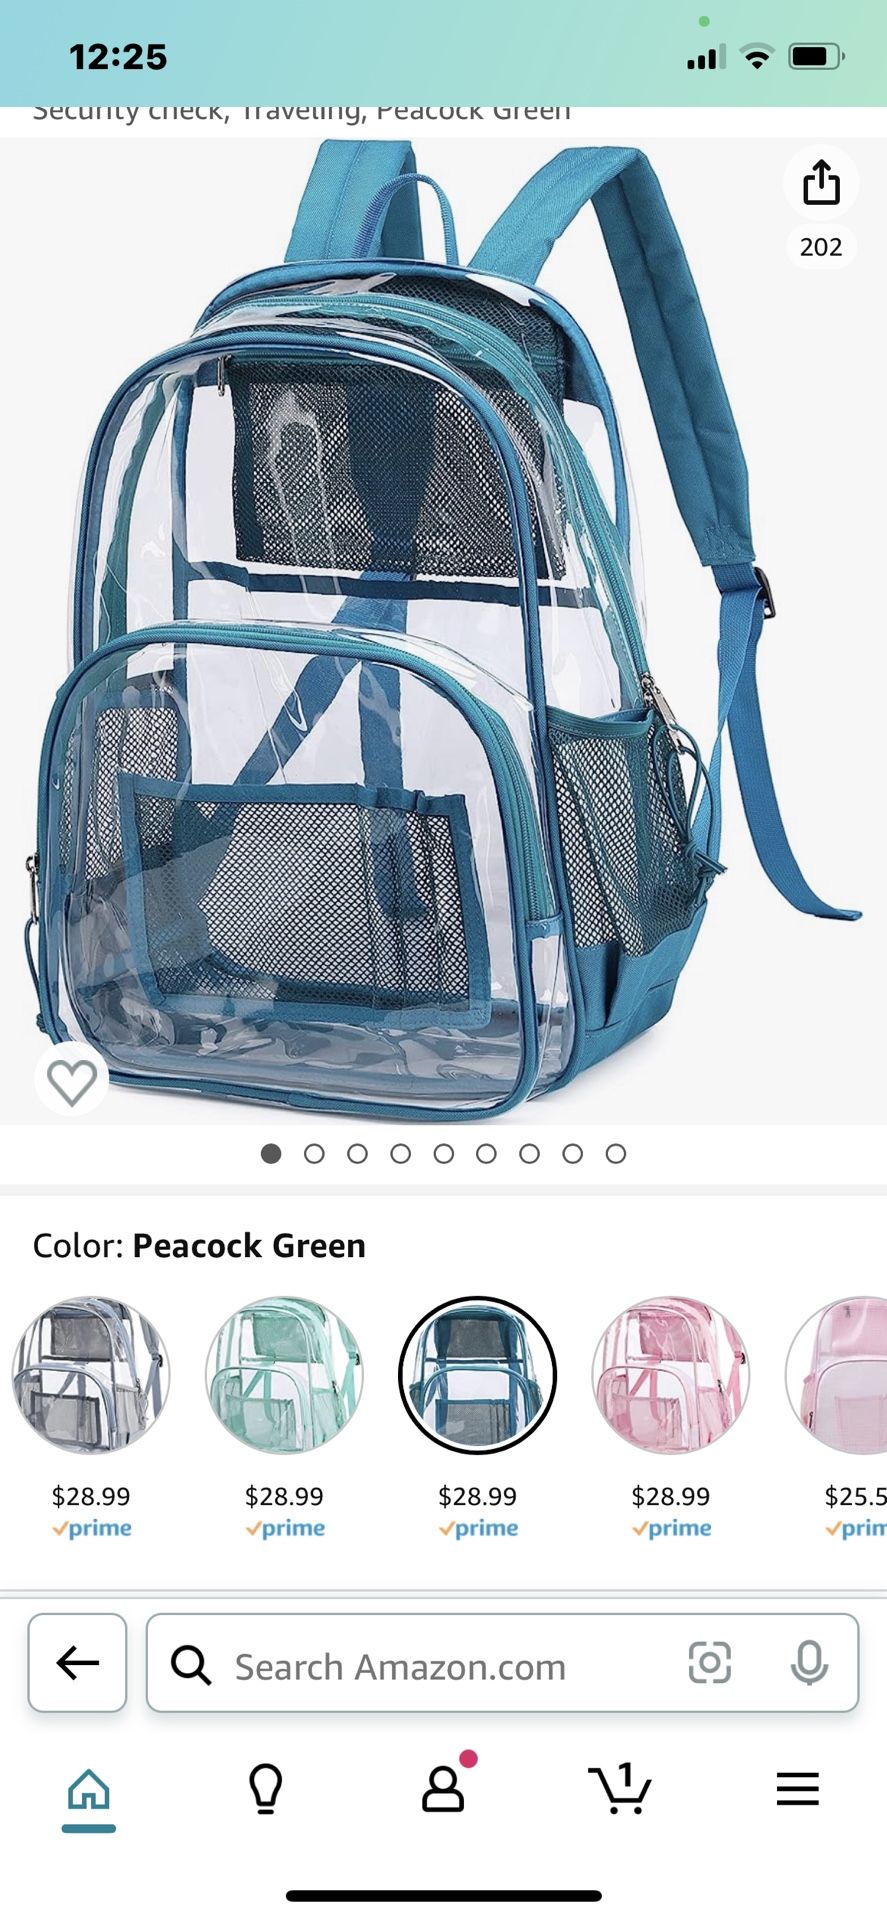 MIRLEWAIY Large Clear PVC Transparent School Backpack Durable See Through Bag Daypack Heavy Duty for Stadium, Security check, Traveling, Peacock Green